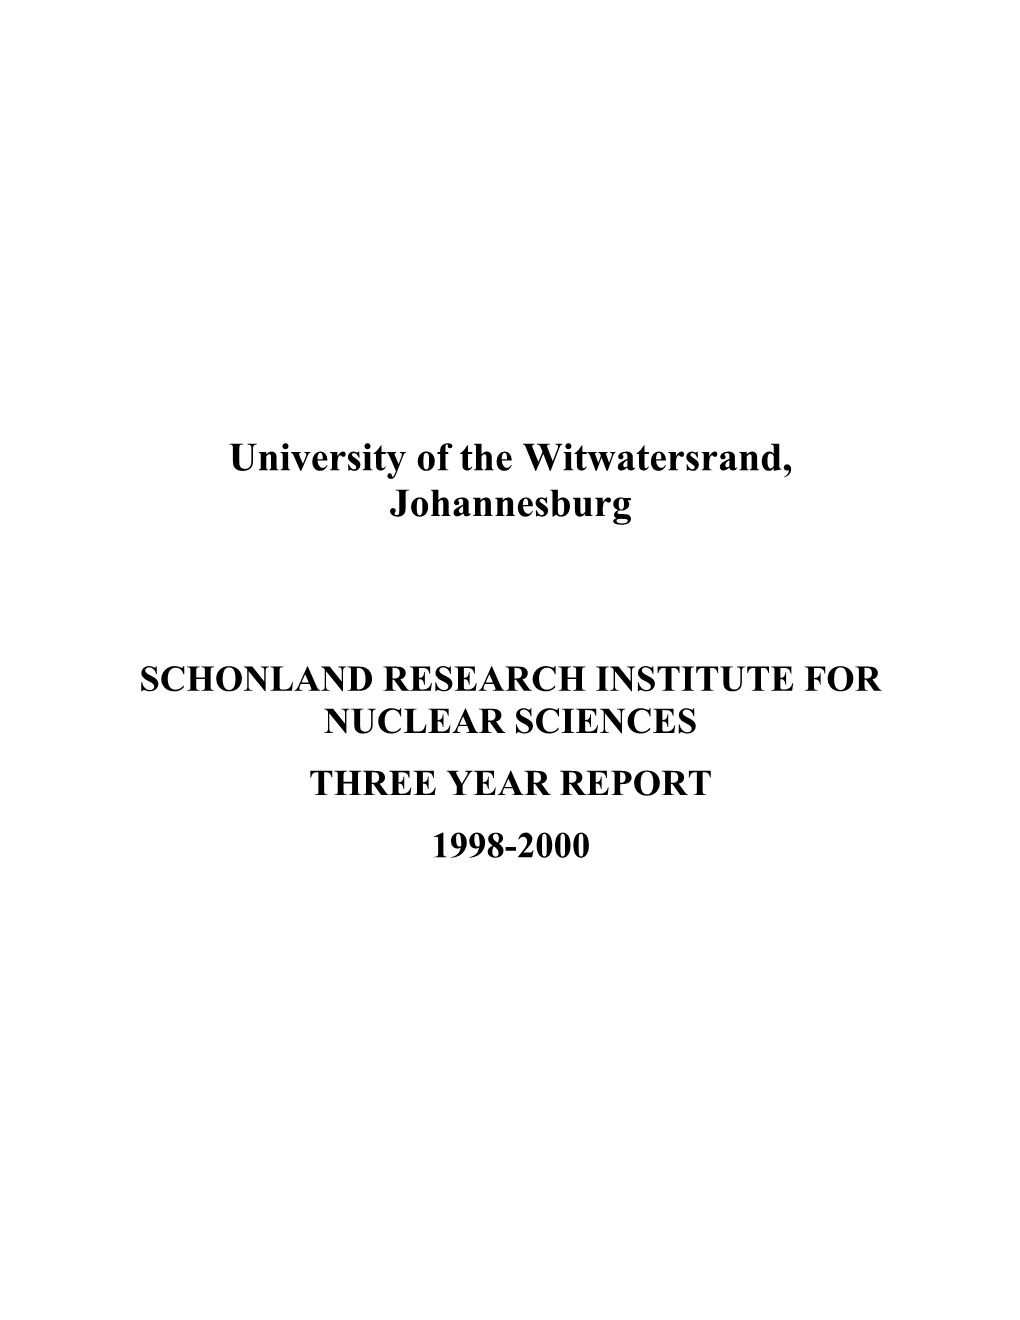 Schonland Research Institute for Nuclear Sciences